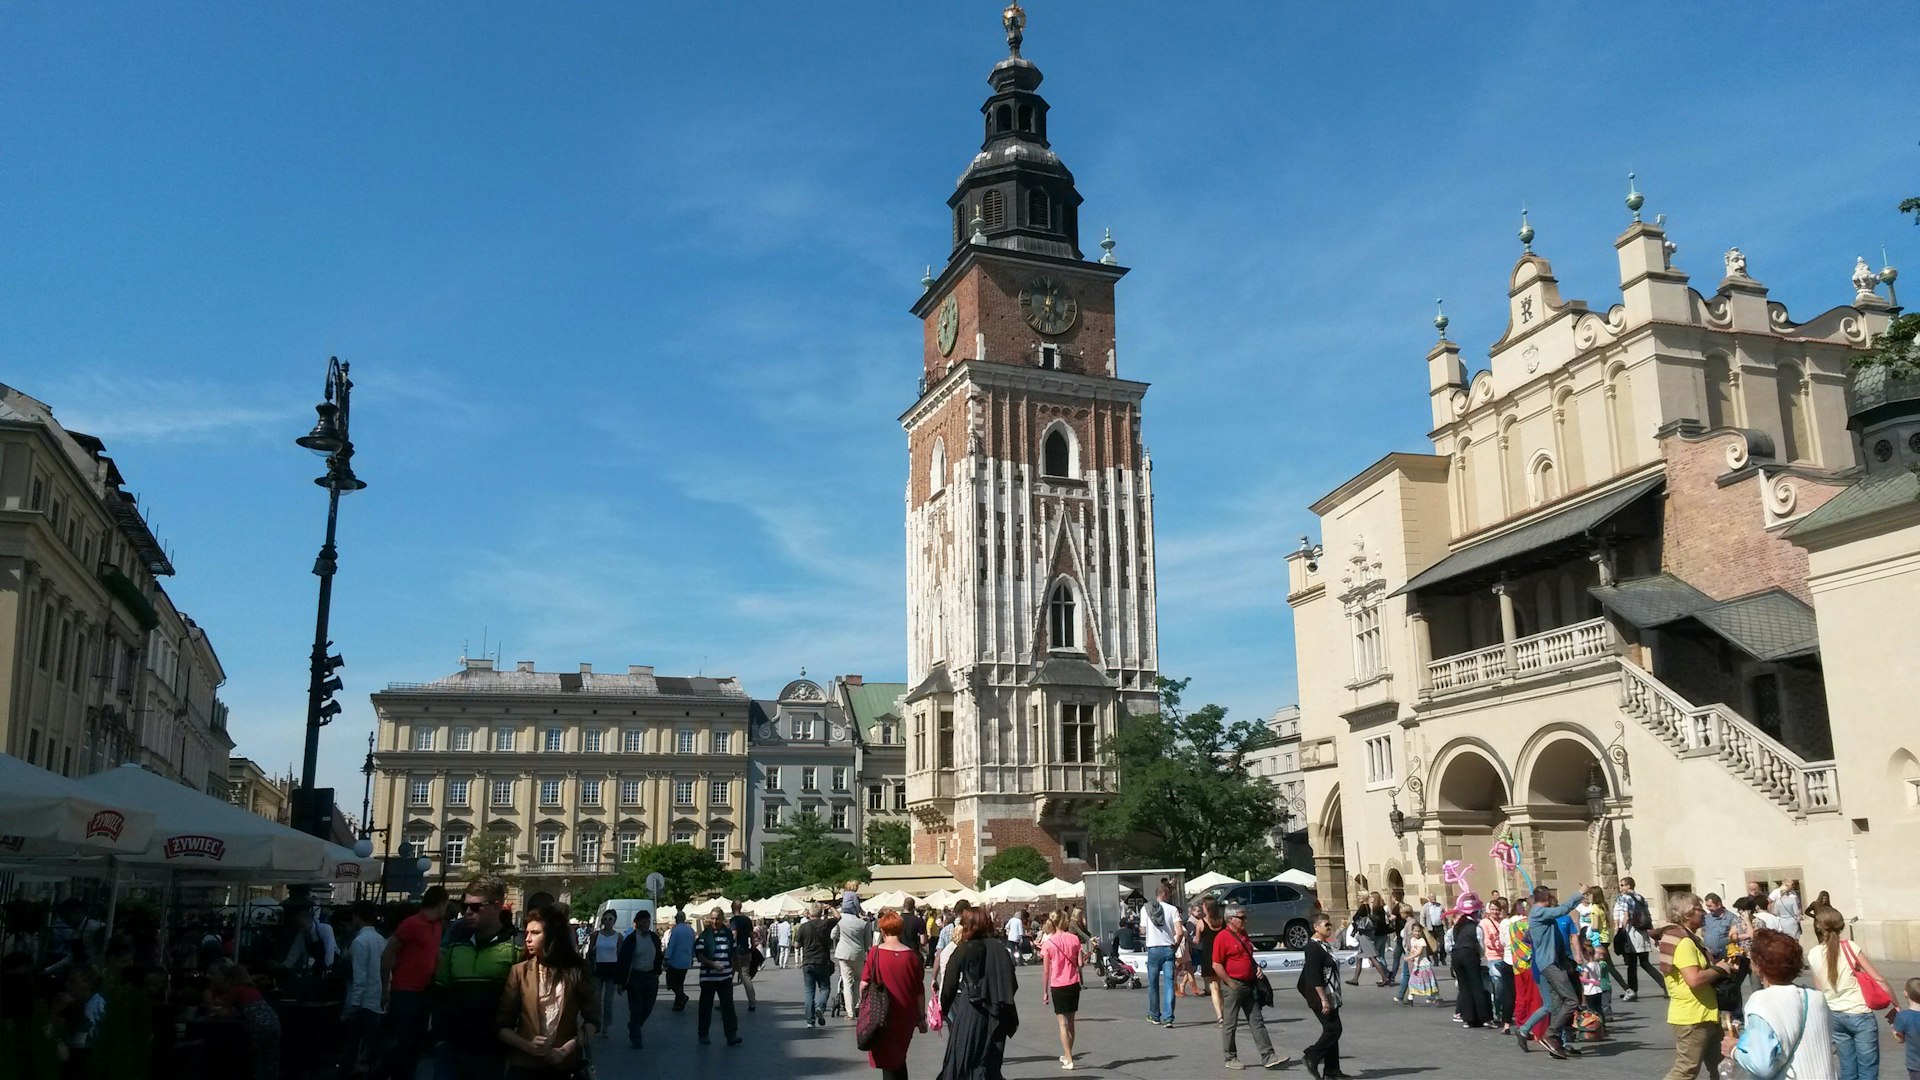 Image of Kraków’s main square showing the Town Hall Tower and Cloth Hall, with crowds of locals and visitors.